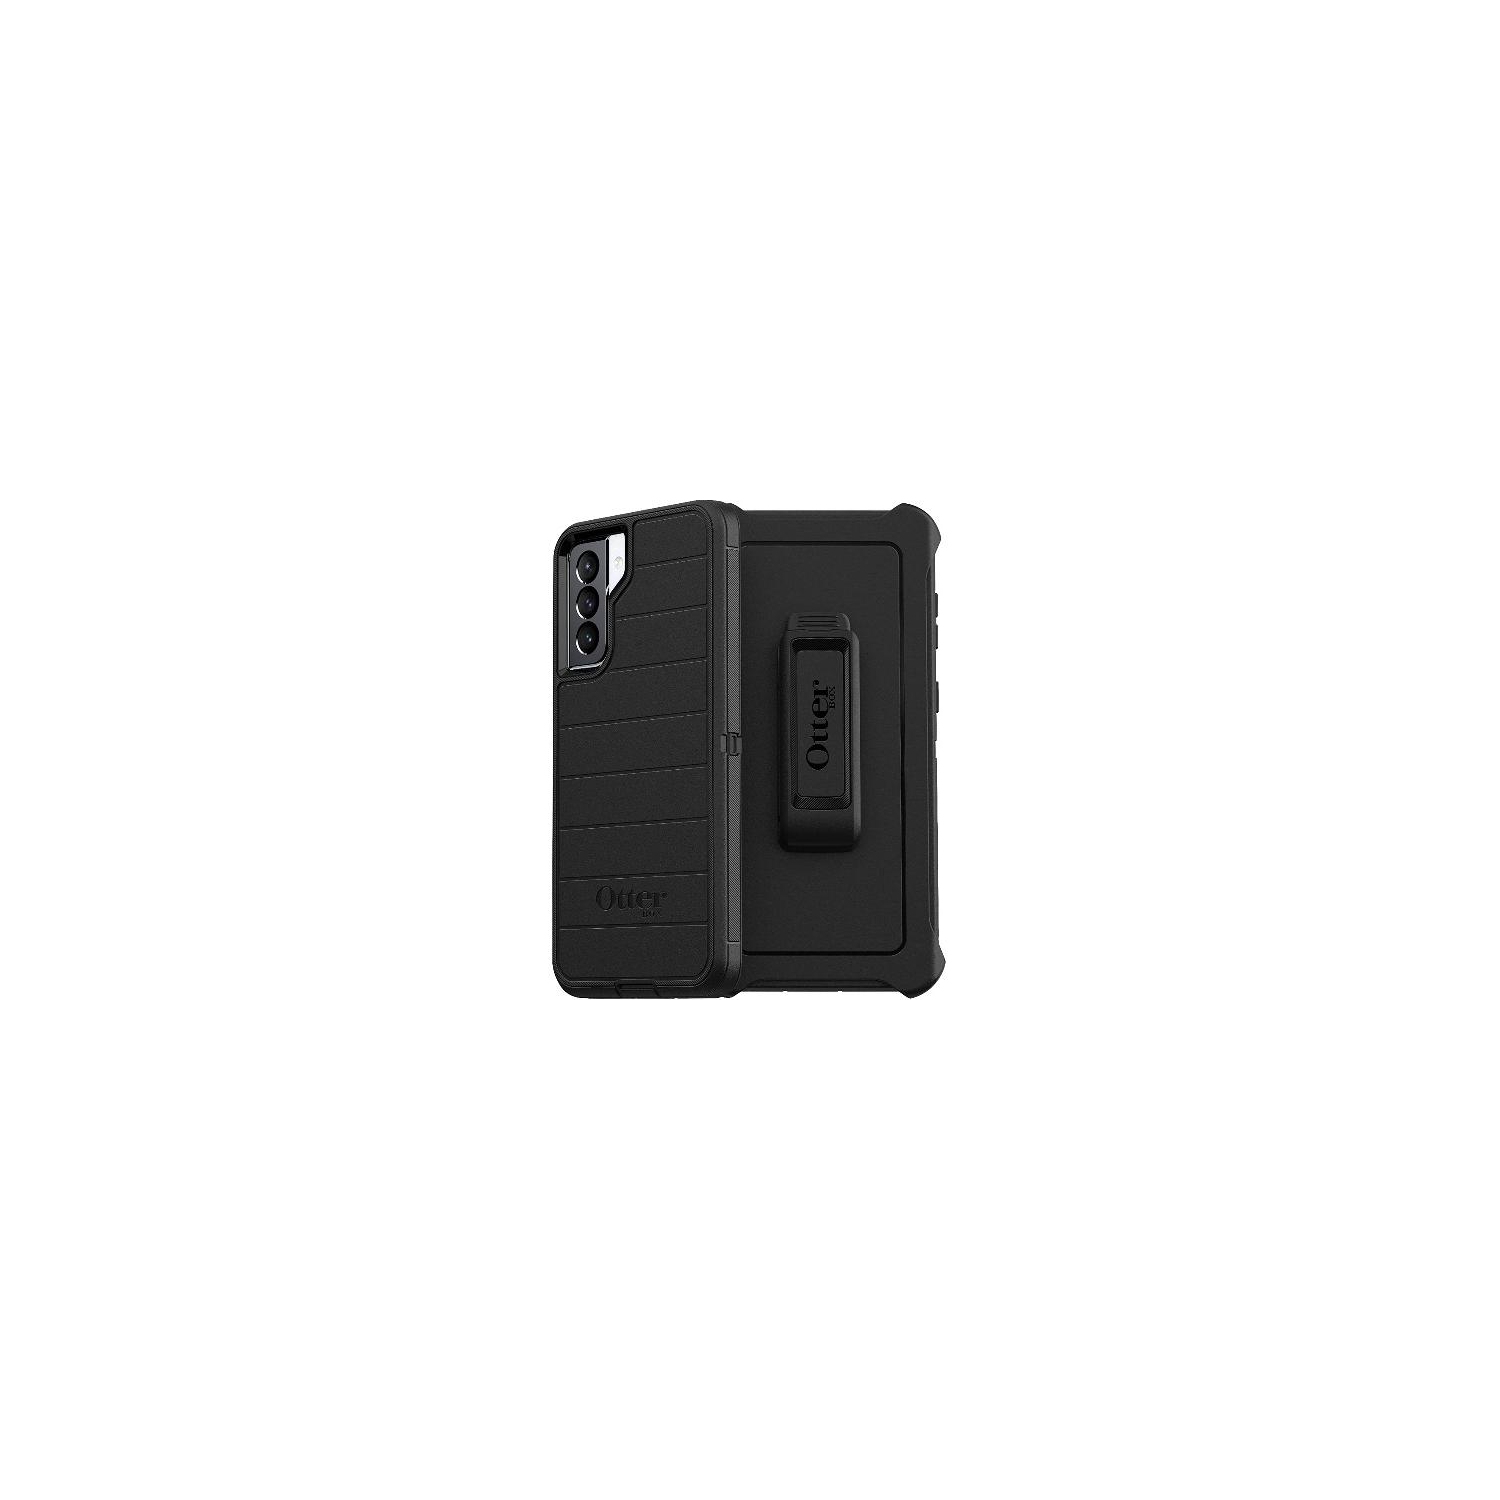 OtterBox Defender Series Rugged Case & Holster for Samsung Galaxy S21 5G - Black (Open Box)